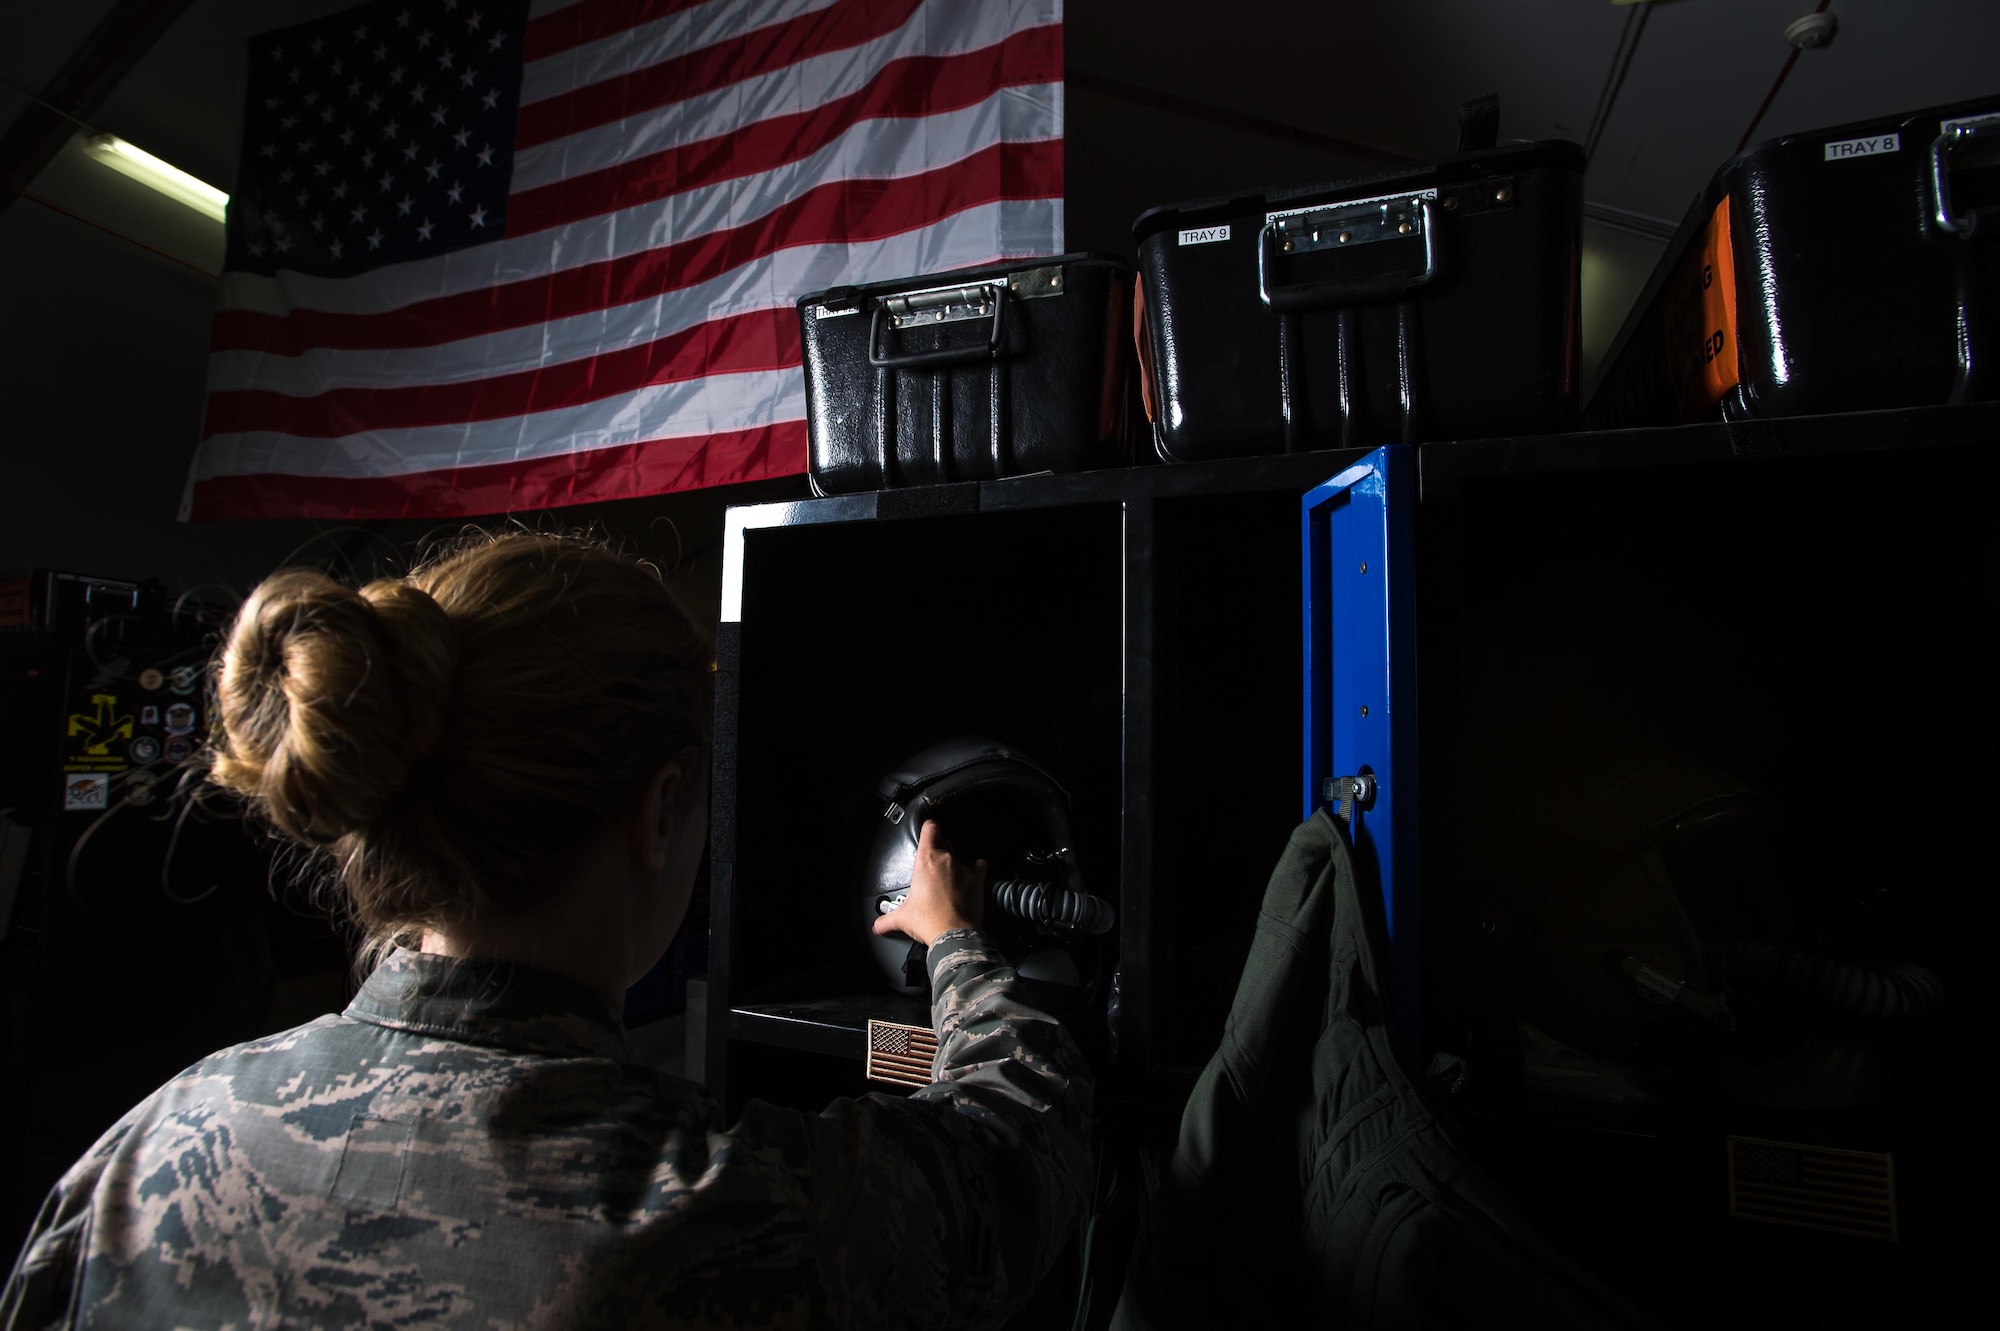 Aircrew Flight Equipment technician Airman 1st Class Kristen, a member of the 380th Air Expeditionary Wing, places a high performance helmet in an F-22 pilot’s locker at an undisclosed location in Southwest Asia, Nov. 11, 2016. “I maintain equipment like anti-gravity suits that enhance the pilots’ performance as well as survival vests that contain components such as recovery radios which help the pilot survive in a situation when they are to be rescued,” Kristen said. (U.S. Air Force photo by Senior Airman Tyler Woodward)